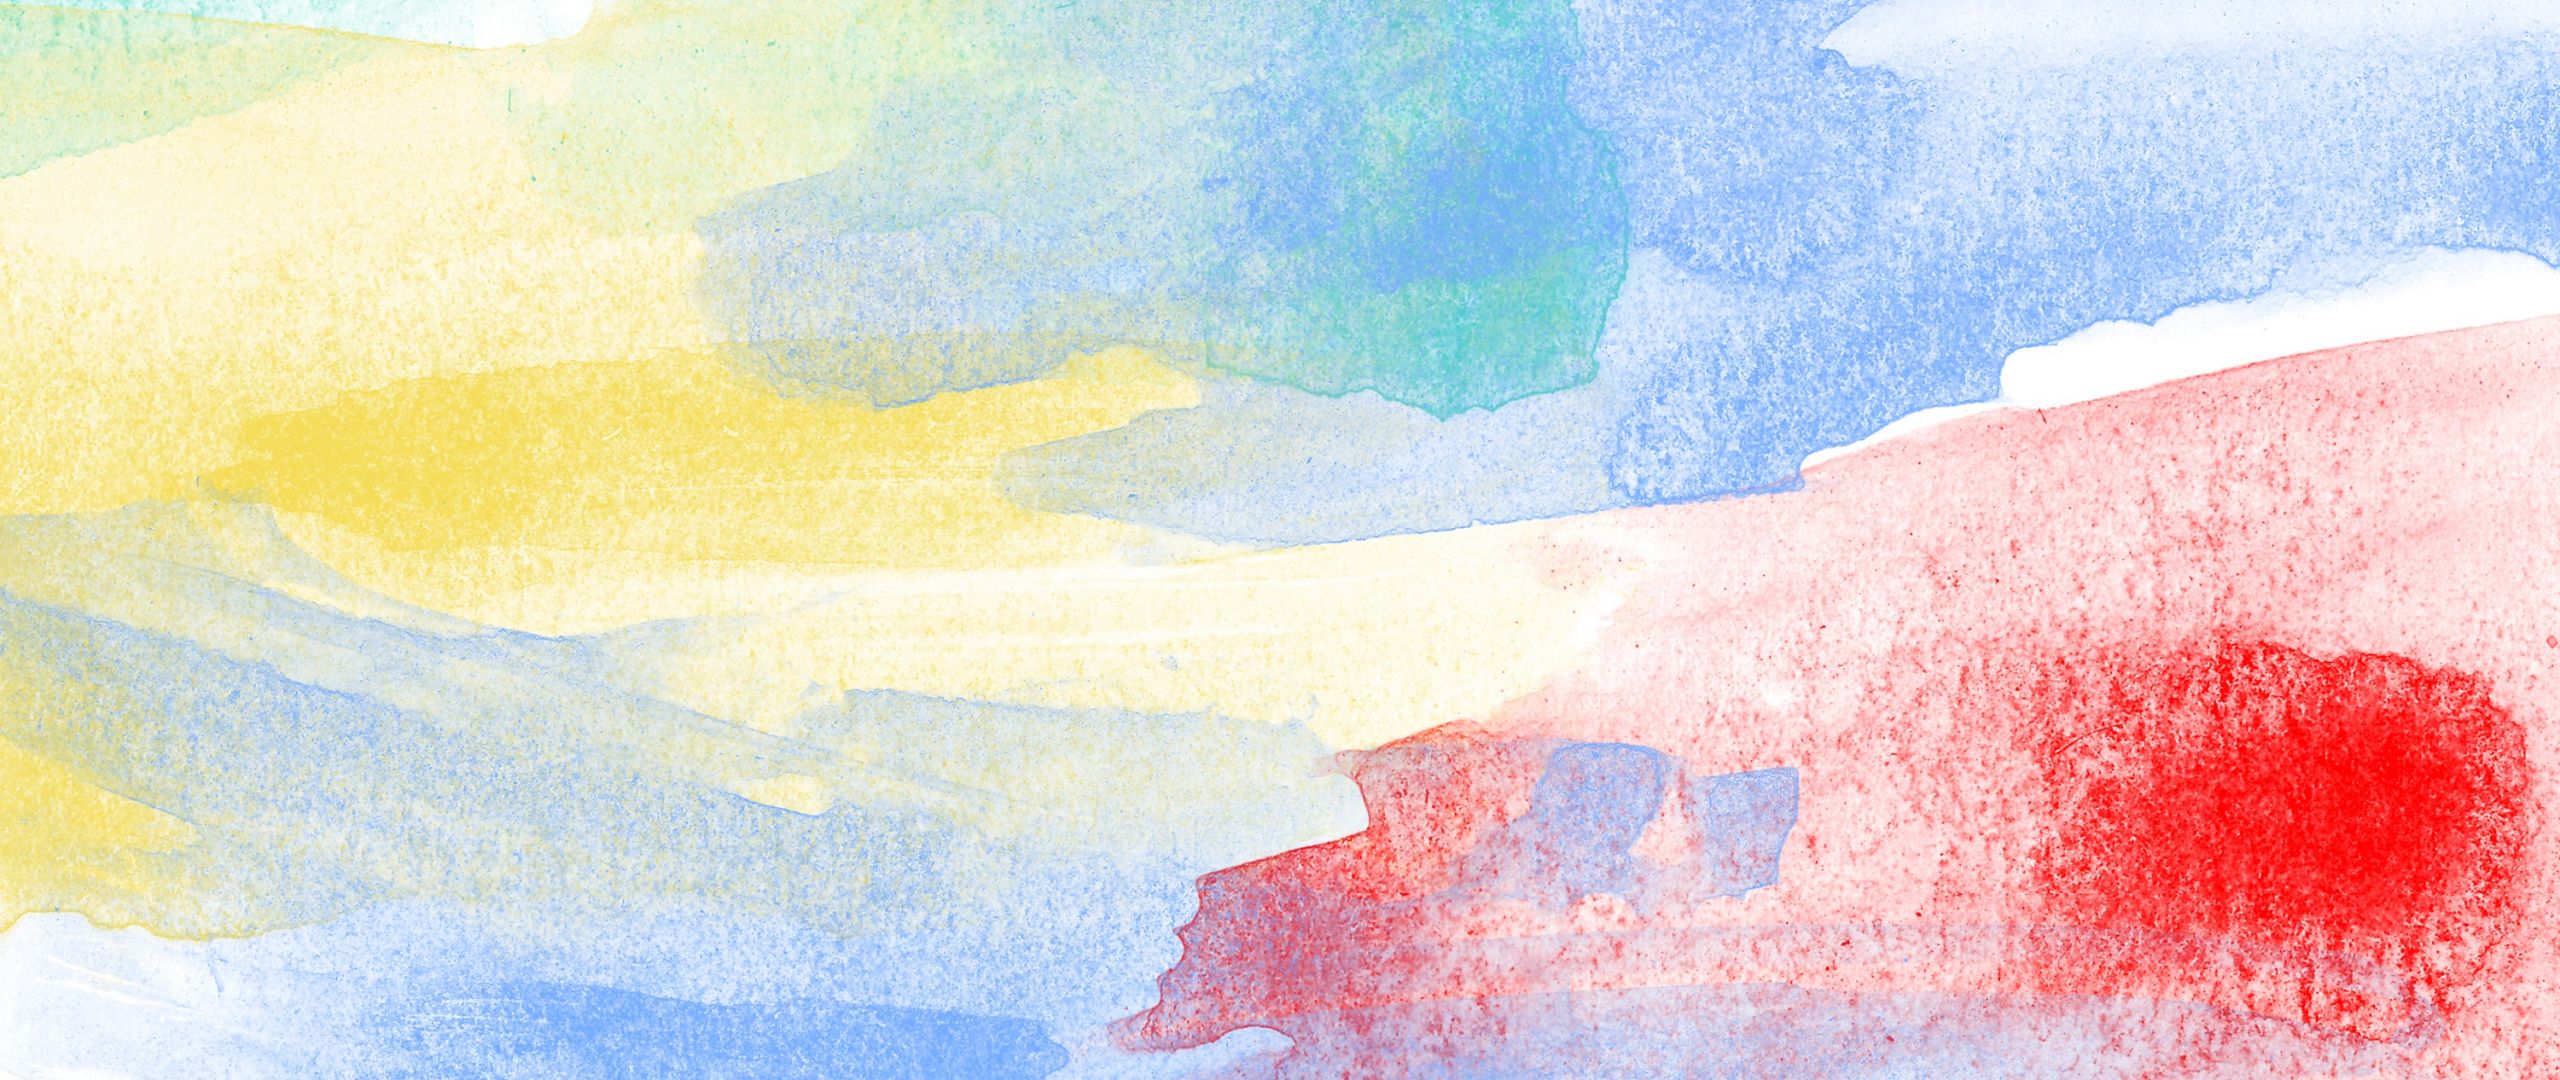 Desktop Wallpaper Watercolor, Abstract, Art, Colorful, HD Image, Picture, Background, Db25d9